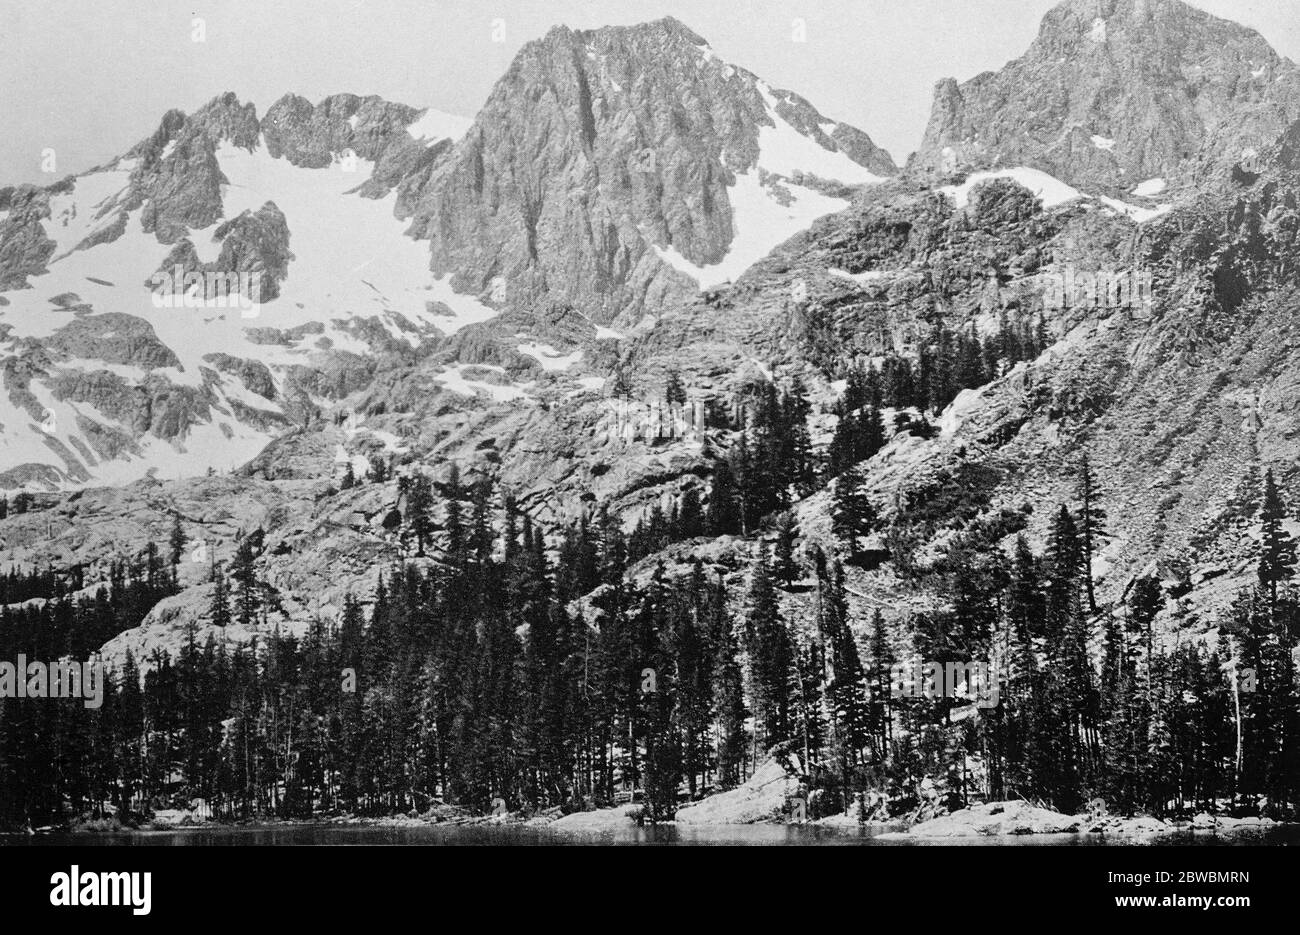 United States Only Volcano Wakes UP Lassens Peak California the United States only active volcano has undergone a twelve hour eruption apparently associated with the earthquakes , shocks and immense tidal waves just experianced in the southern Pacific . Lassen ' s Peak had previously been dormant for a year 6 February 1923 Stock Photo